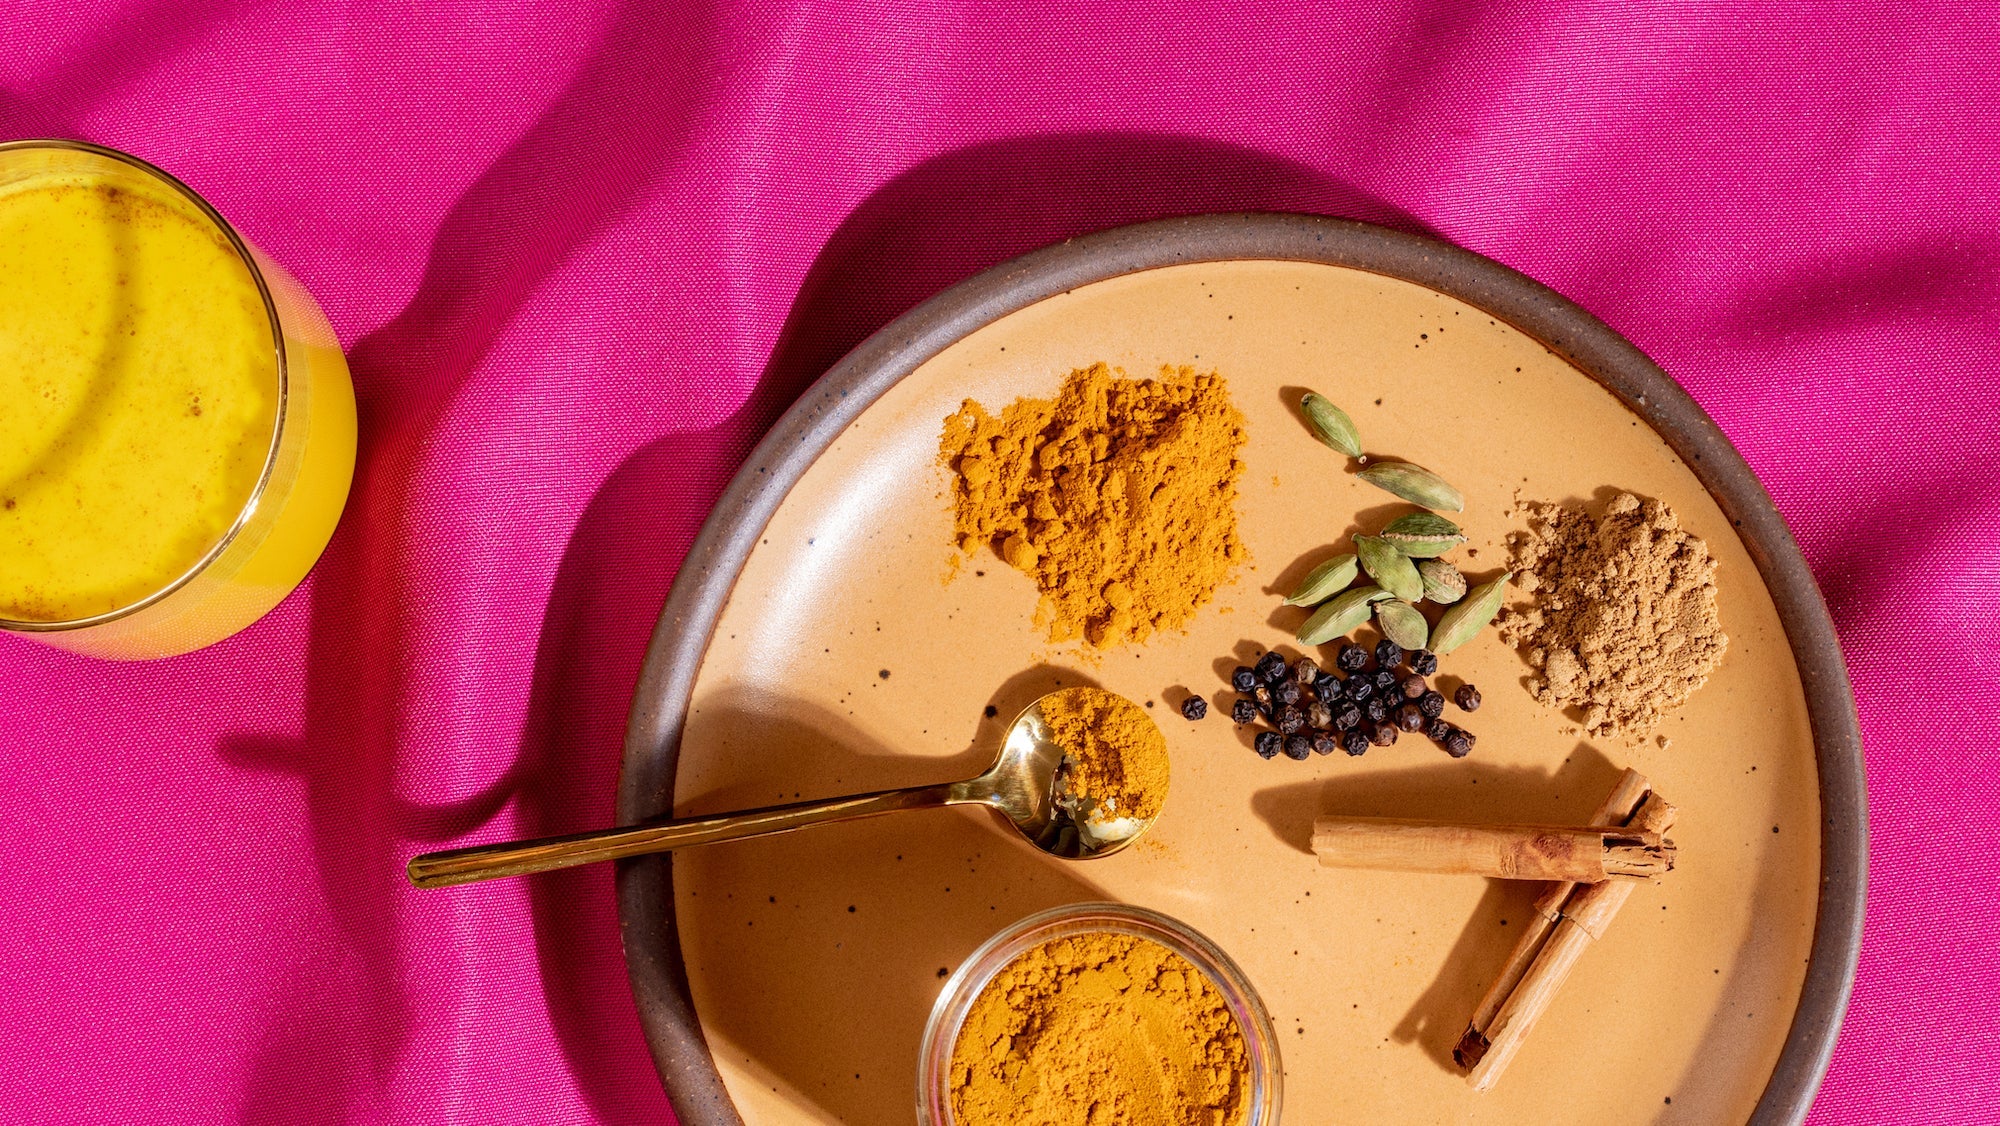 Cup of Haldi Doodh with a plate of the spices involved on a pink cloth background